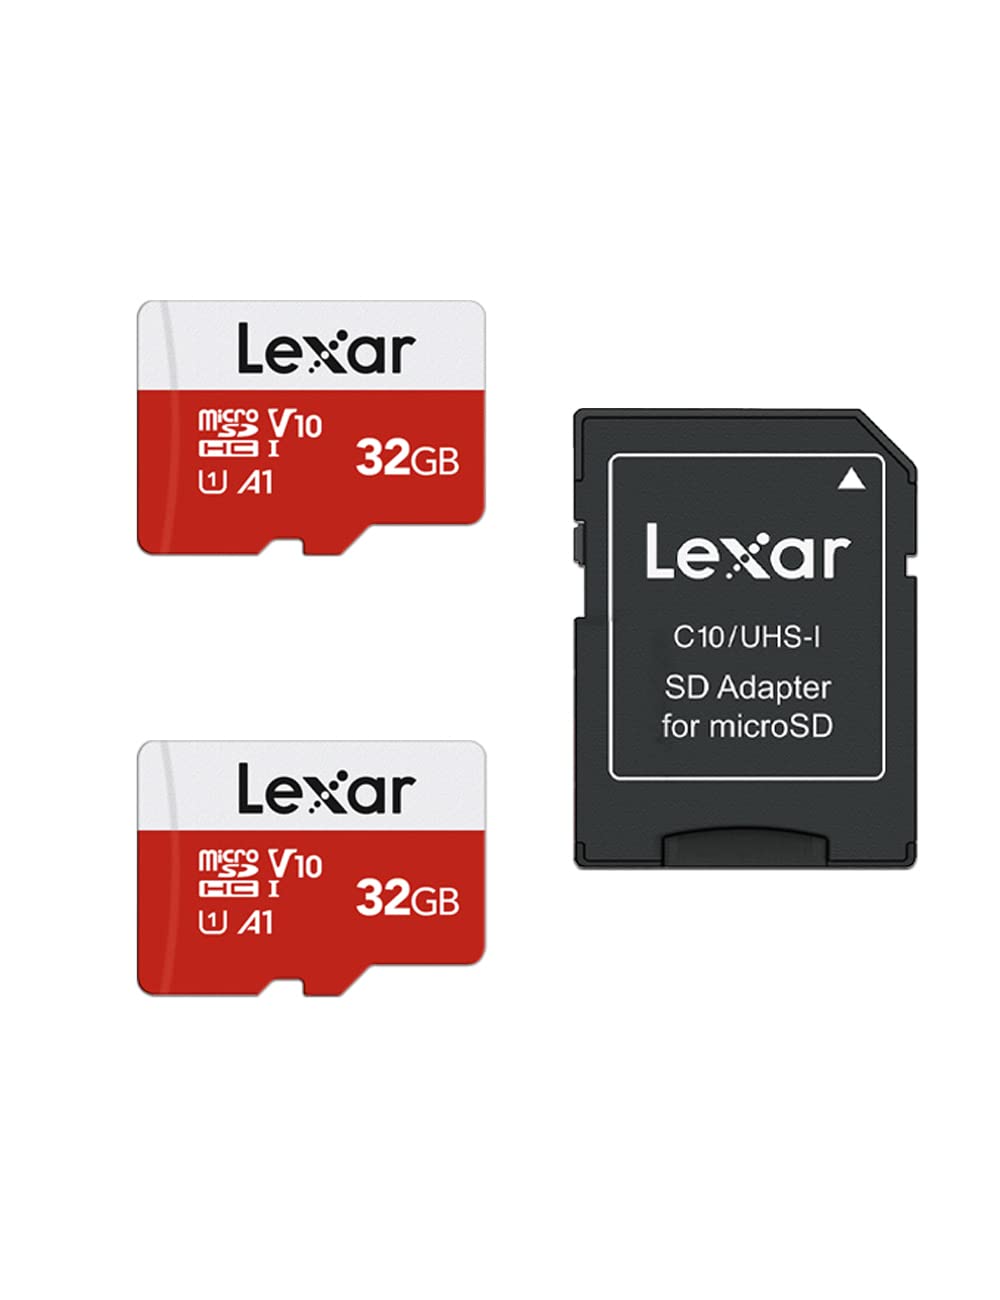 Lexar 32GB Micro SD Card 2 Pack, microSDHC UHS-I Flash Memory Card with Adapter - Up to 100MB/s, U1, Class10, V10, A1, High Speed TF Card (2 microSD Cards + 1 Adapter) 32GB x 2